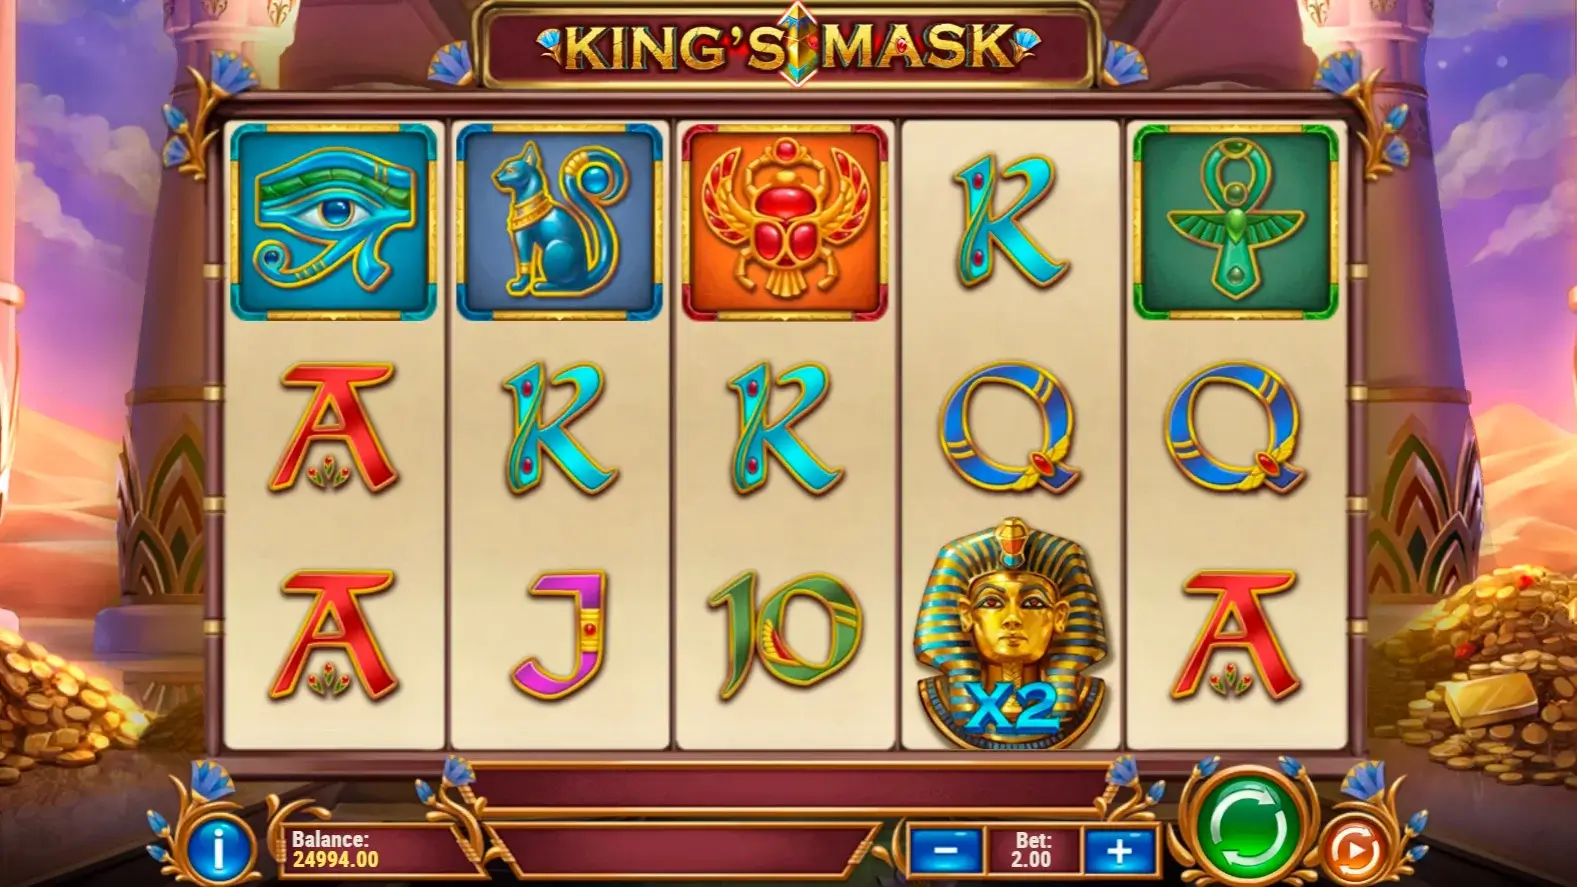 King’s mask